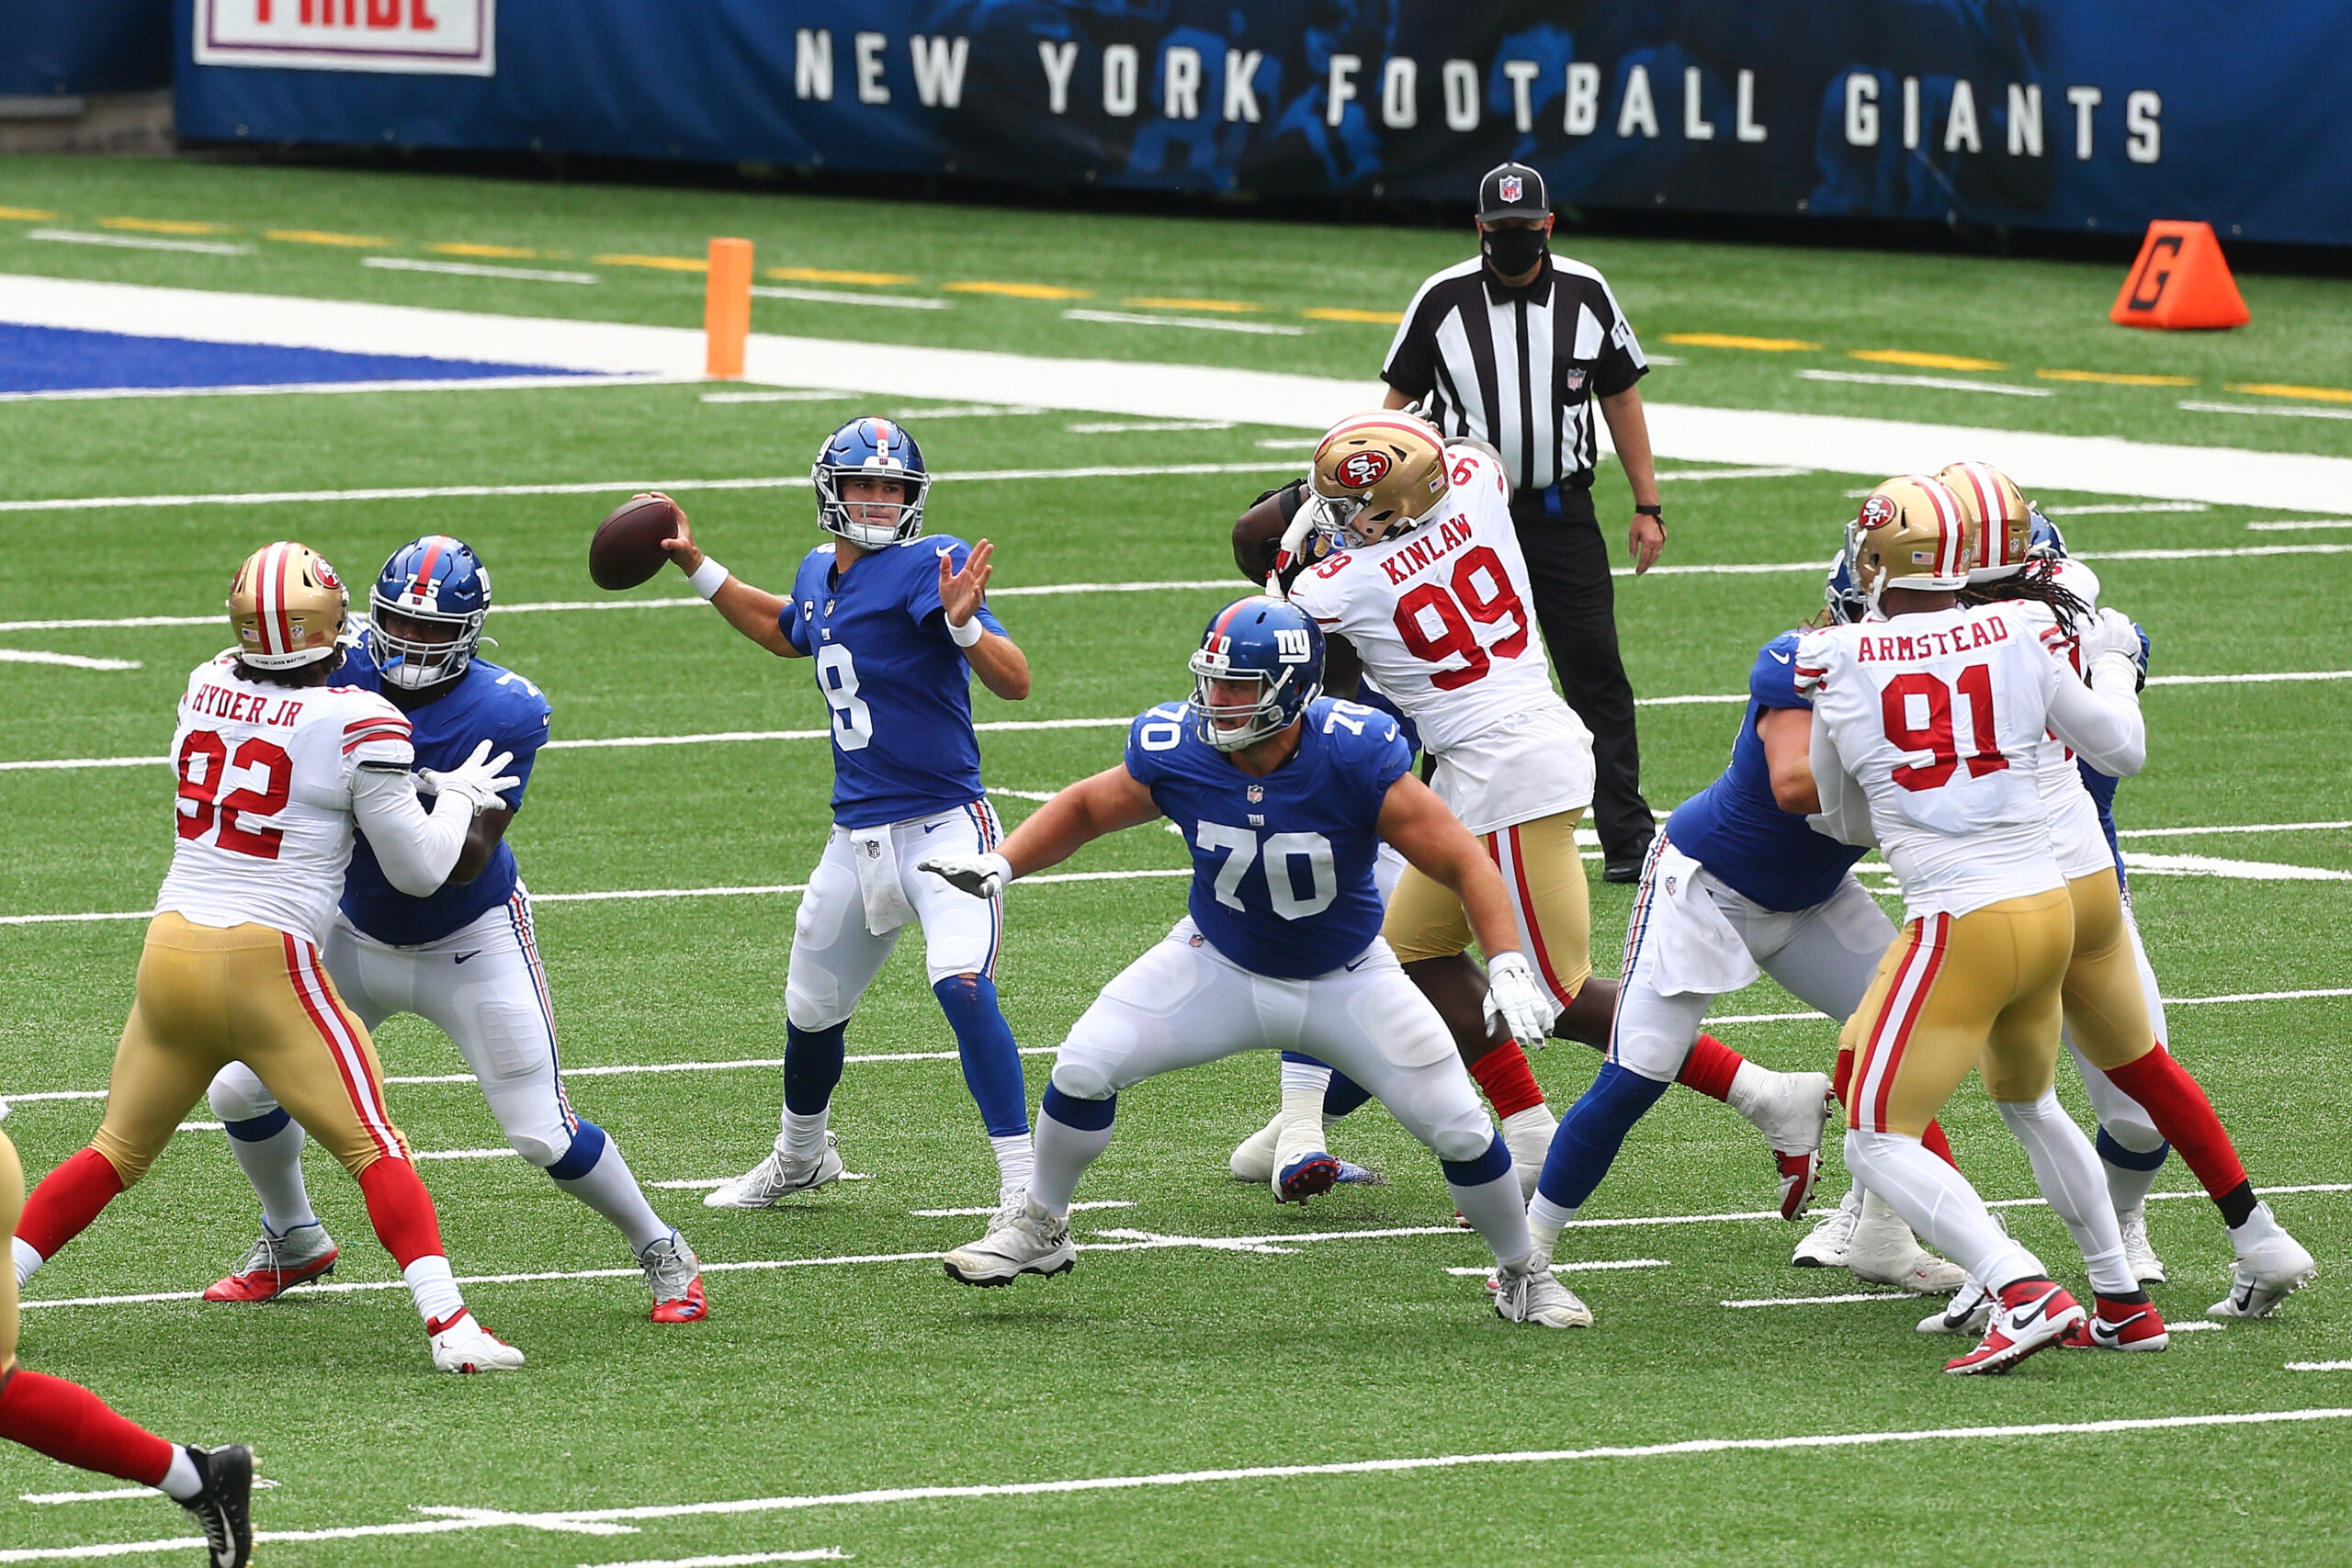 EAST RUTHERFORD, NEW JERSEY - SEPTEMBER 27: Daniel Jones #8 of the New York Giants in action against the San Francisco 49ers at MetLife Stadium on September 27, 2020 in East Rutherford, New Jersey. San Francisco 49ers defeated the New York Giants 36-9. (Photo by Mike Stobe/Getty Images)